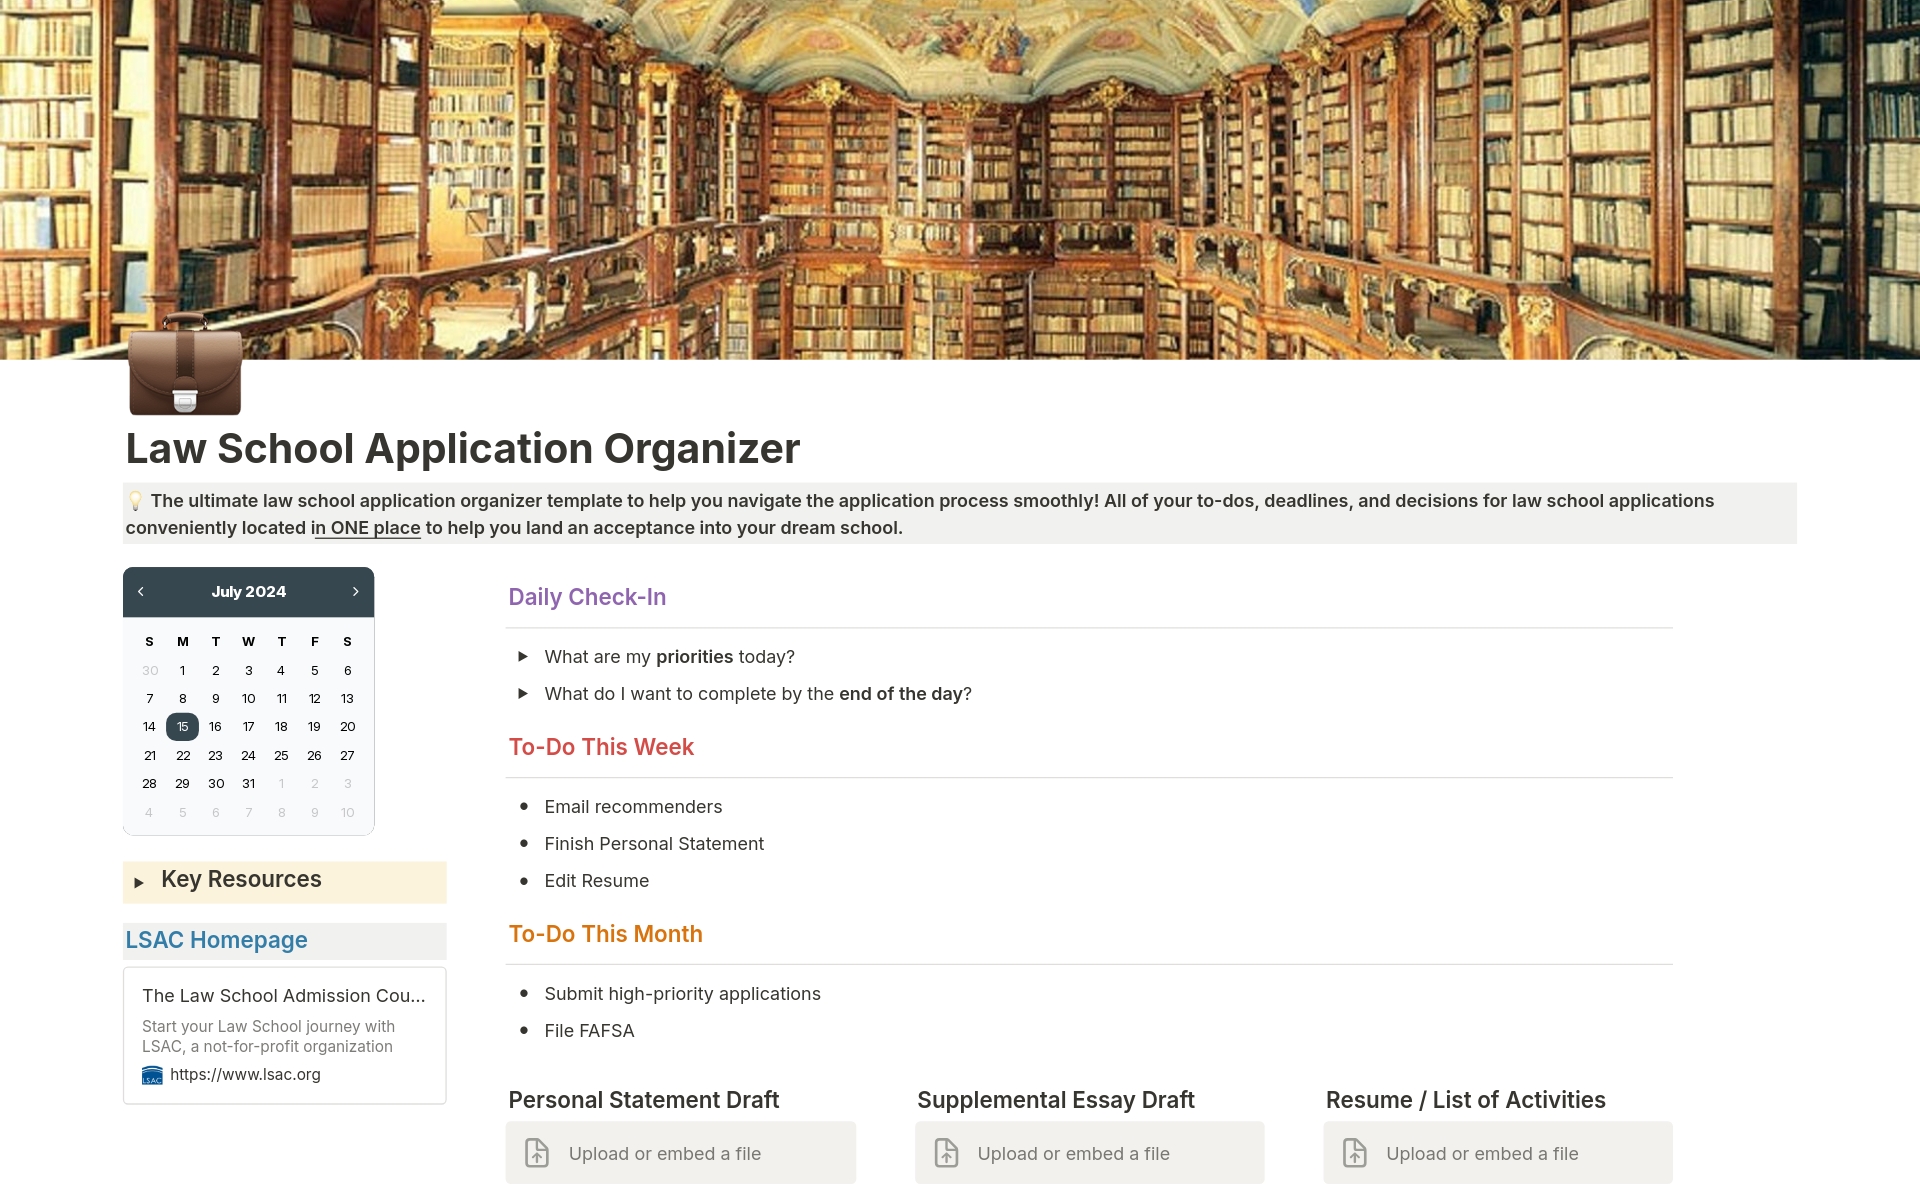 💡 The ULTIMATE law school application organizer template to help you navigate the application process smoothly! All of your to-dos, deadlines, and decisions for law school applications conveniently located in ONE place to help you land your dream school.